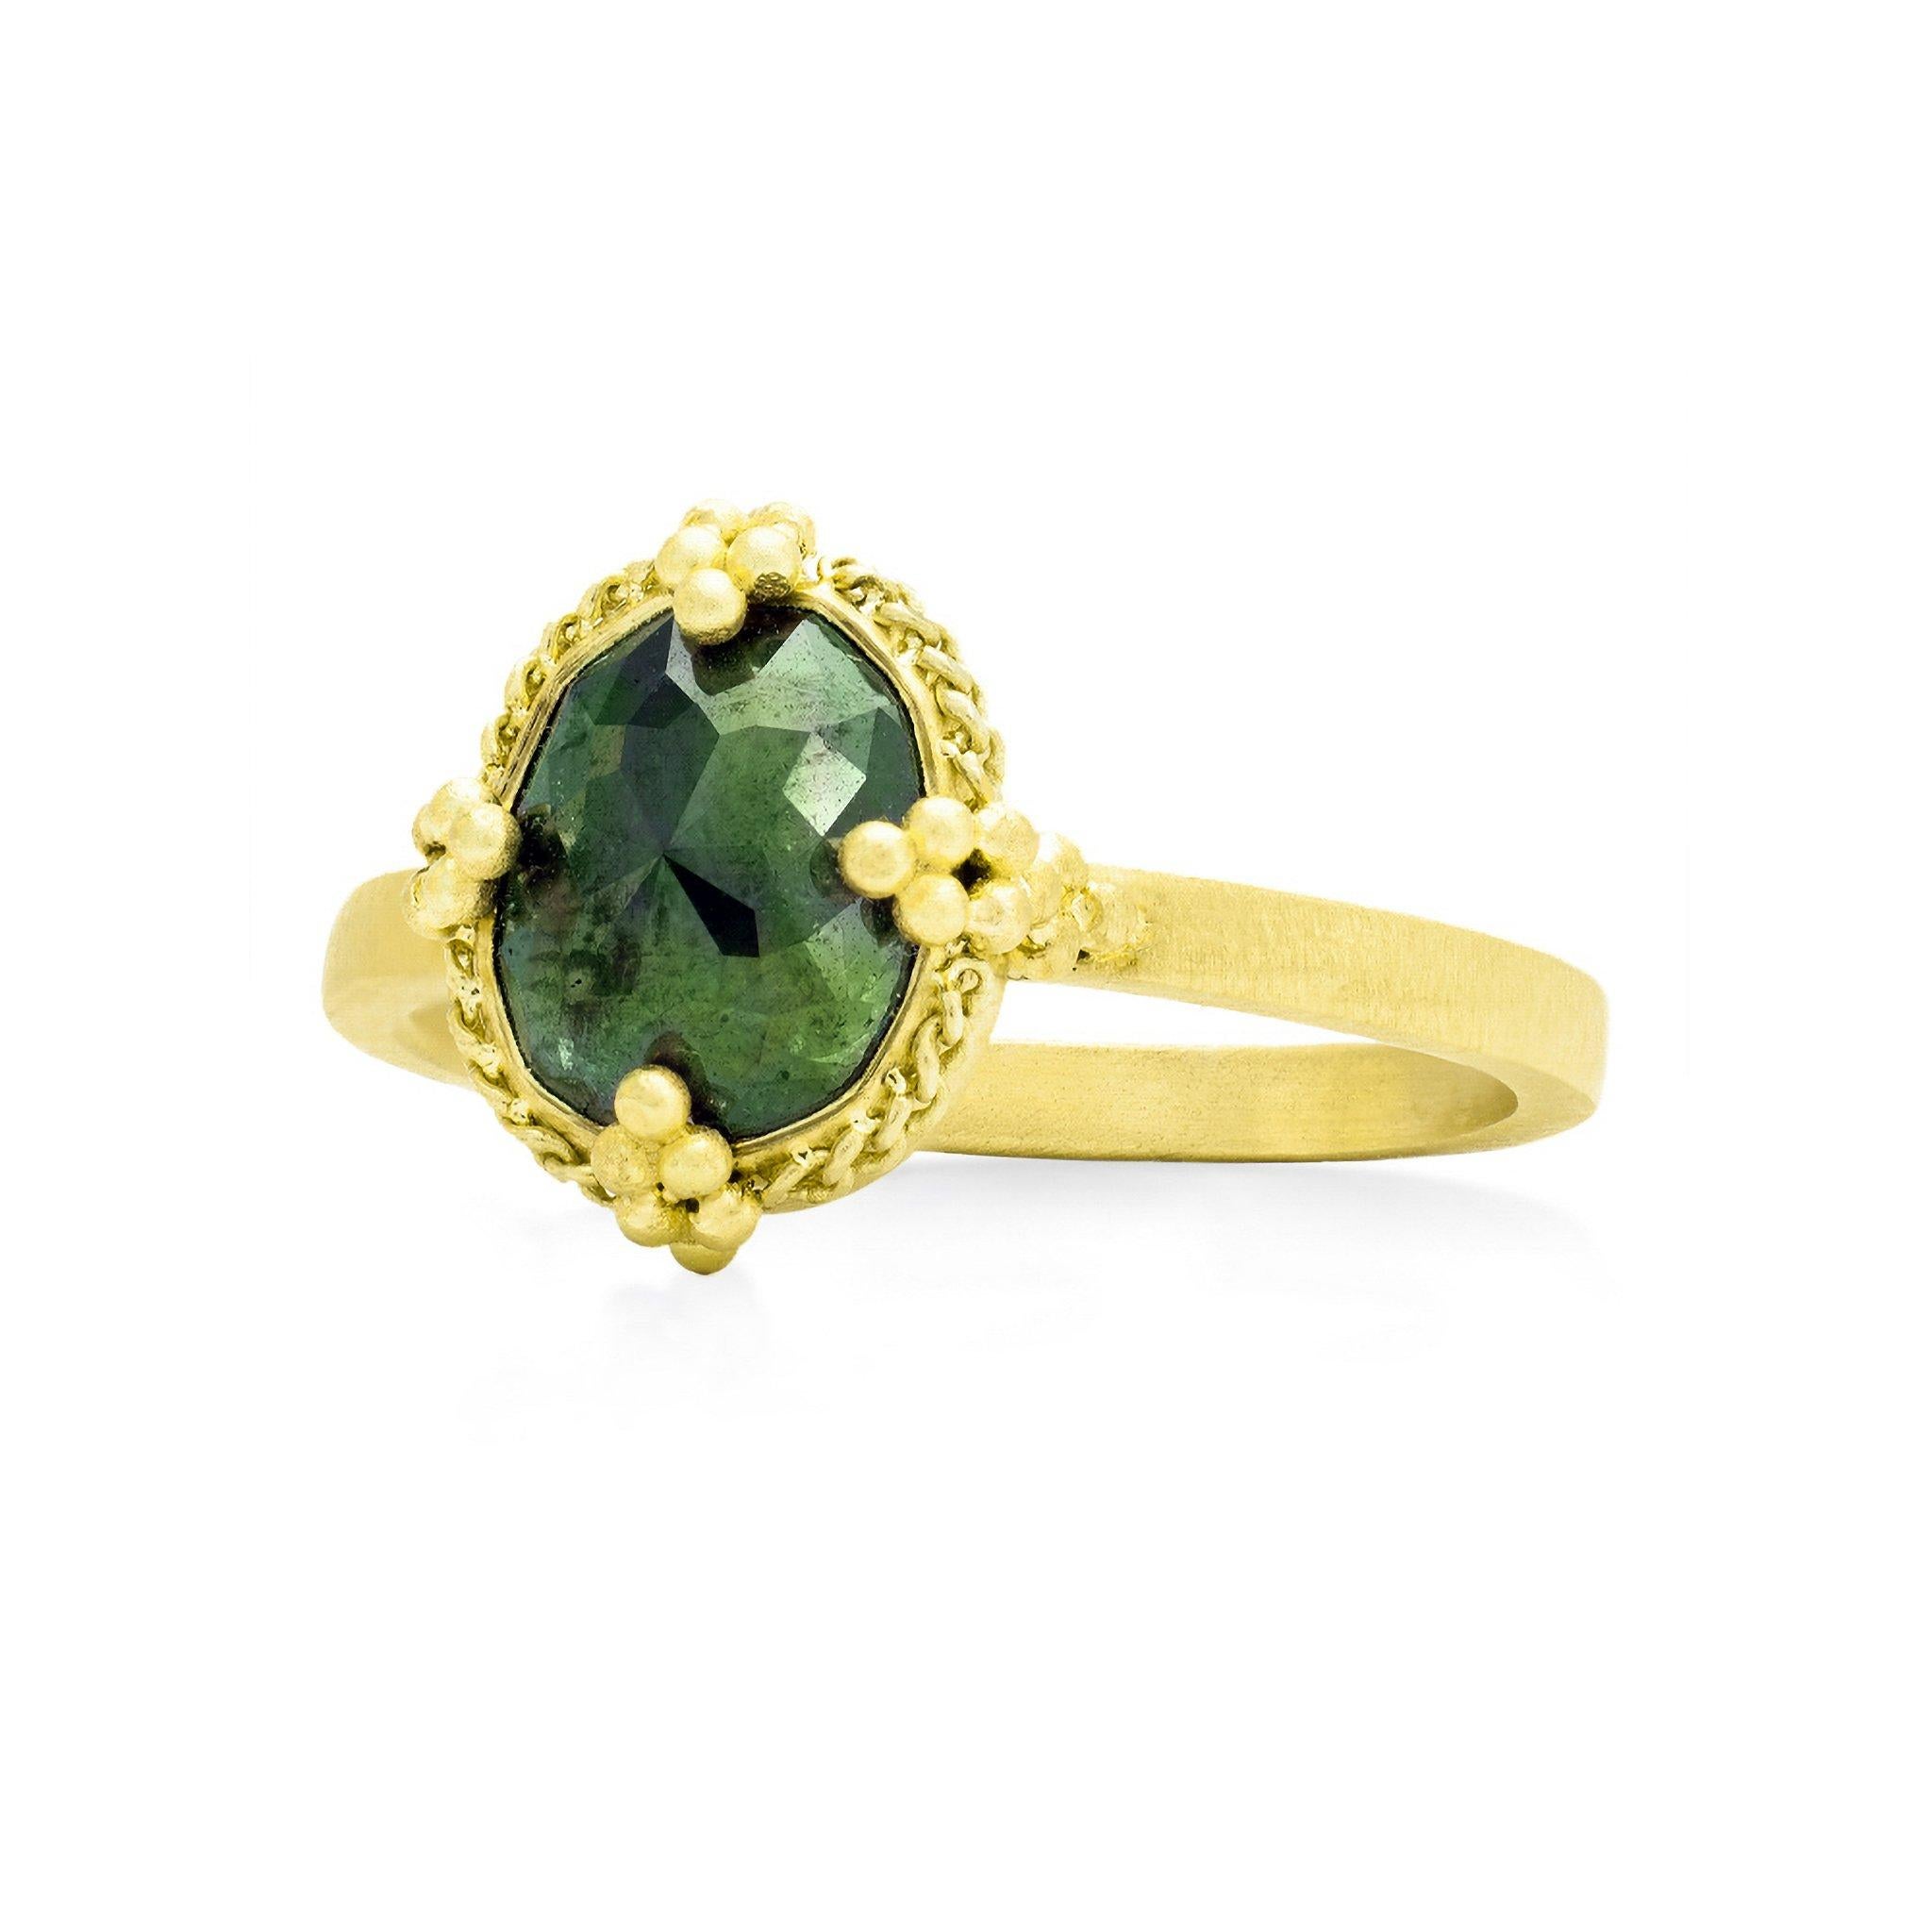 Reminiscent of a family heirloom, this one-of-a-kind ring features a rose-cut diamond encased in our signature chain bezel with beaded prongs. Covered in a surface of light reflecting facets, the forest green color of this diamond is undeniably